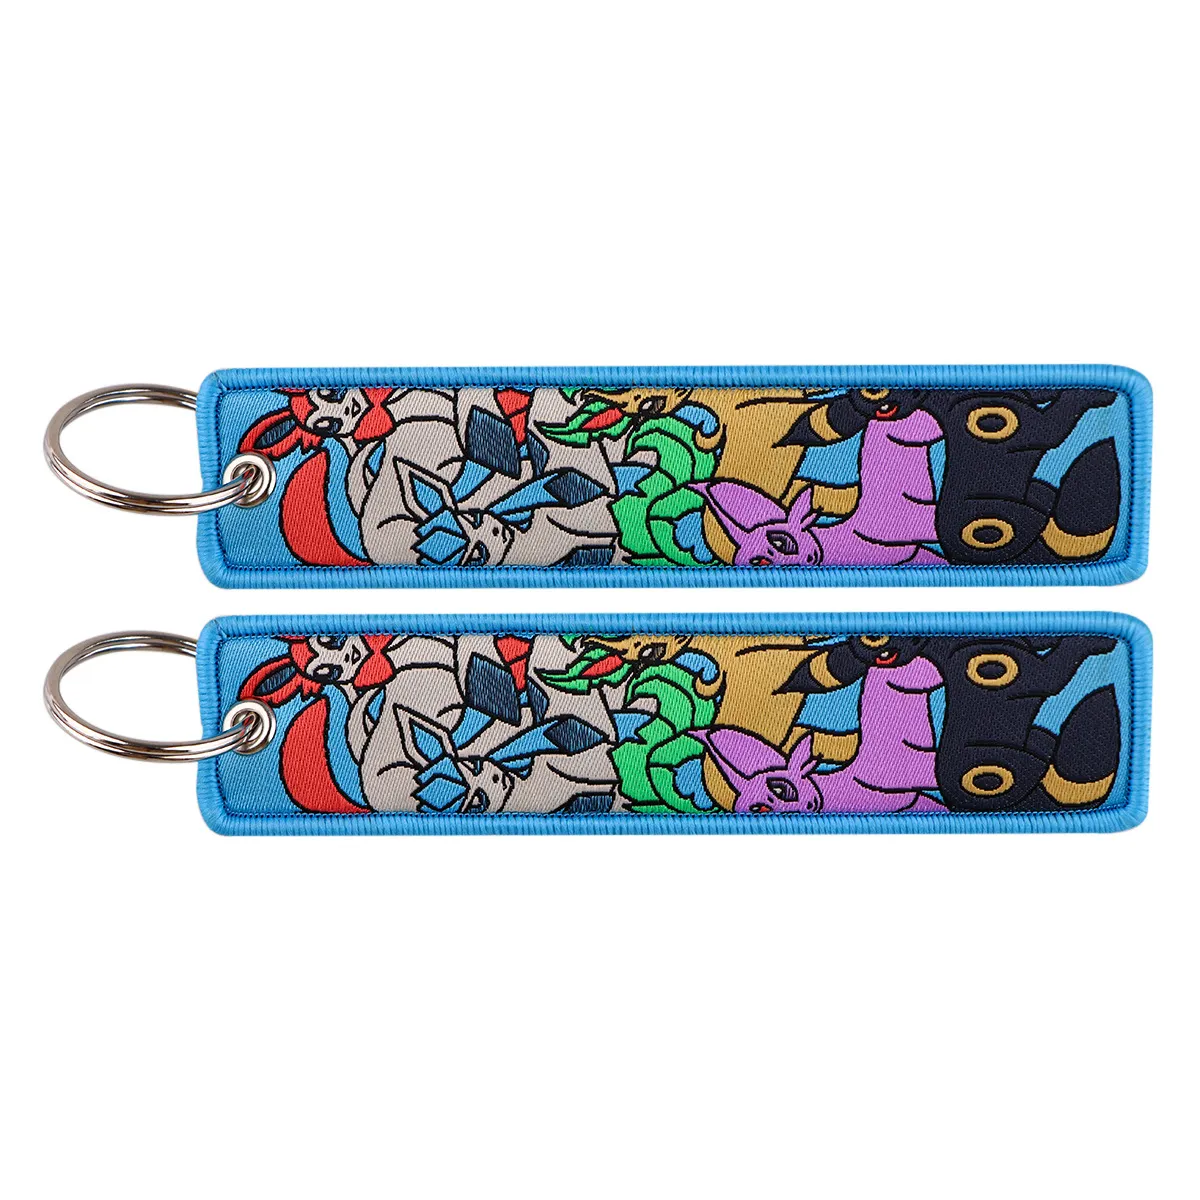 Keychains & Lanyards Various Types Of Cartoon Cool Key Tag Embroidery Fobs For Motorcycles Cars Bag Backpack Keychain Fashion Ring Gi Otj8J